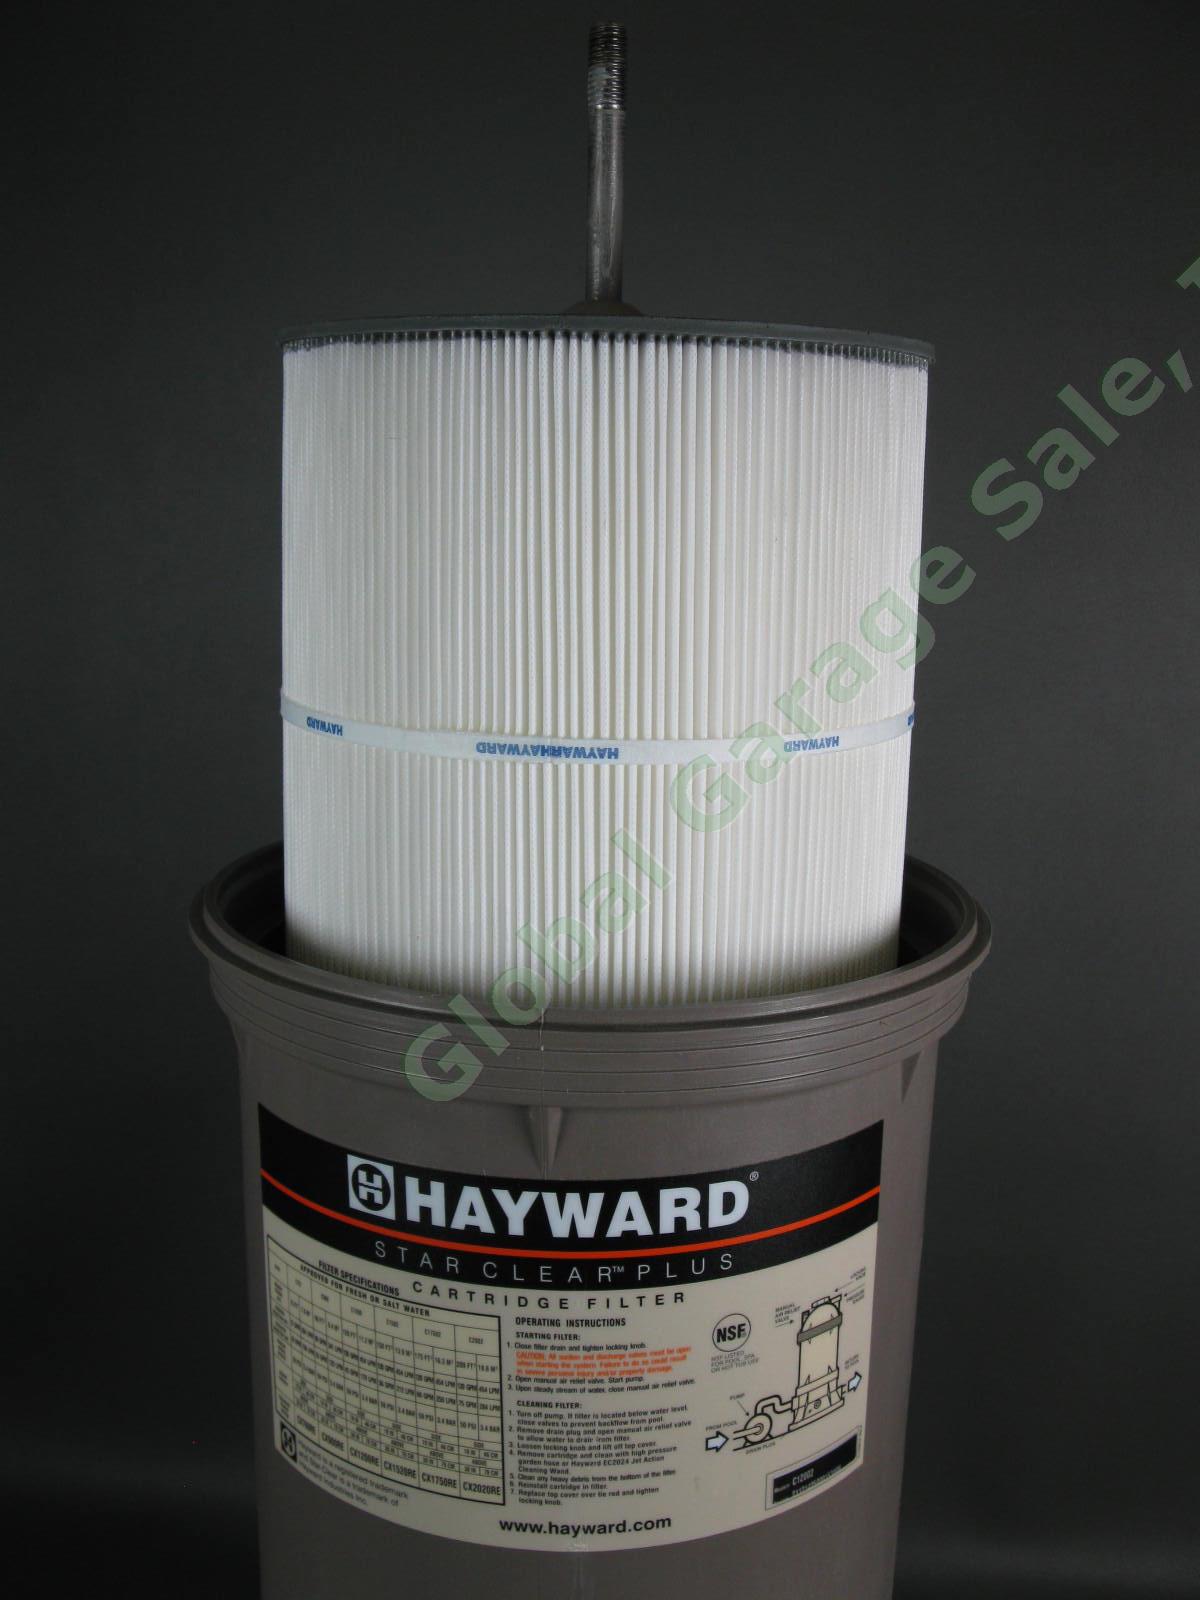 Hayward Star Clear Plus C12002 Pool Filter Cartridge 120 Sq Ft COMPLETE System 5